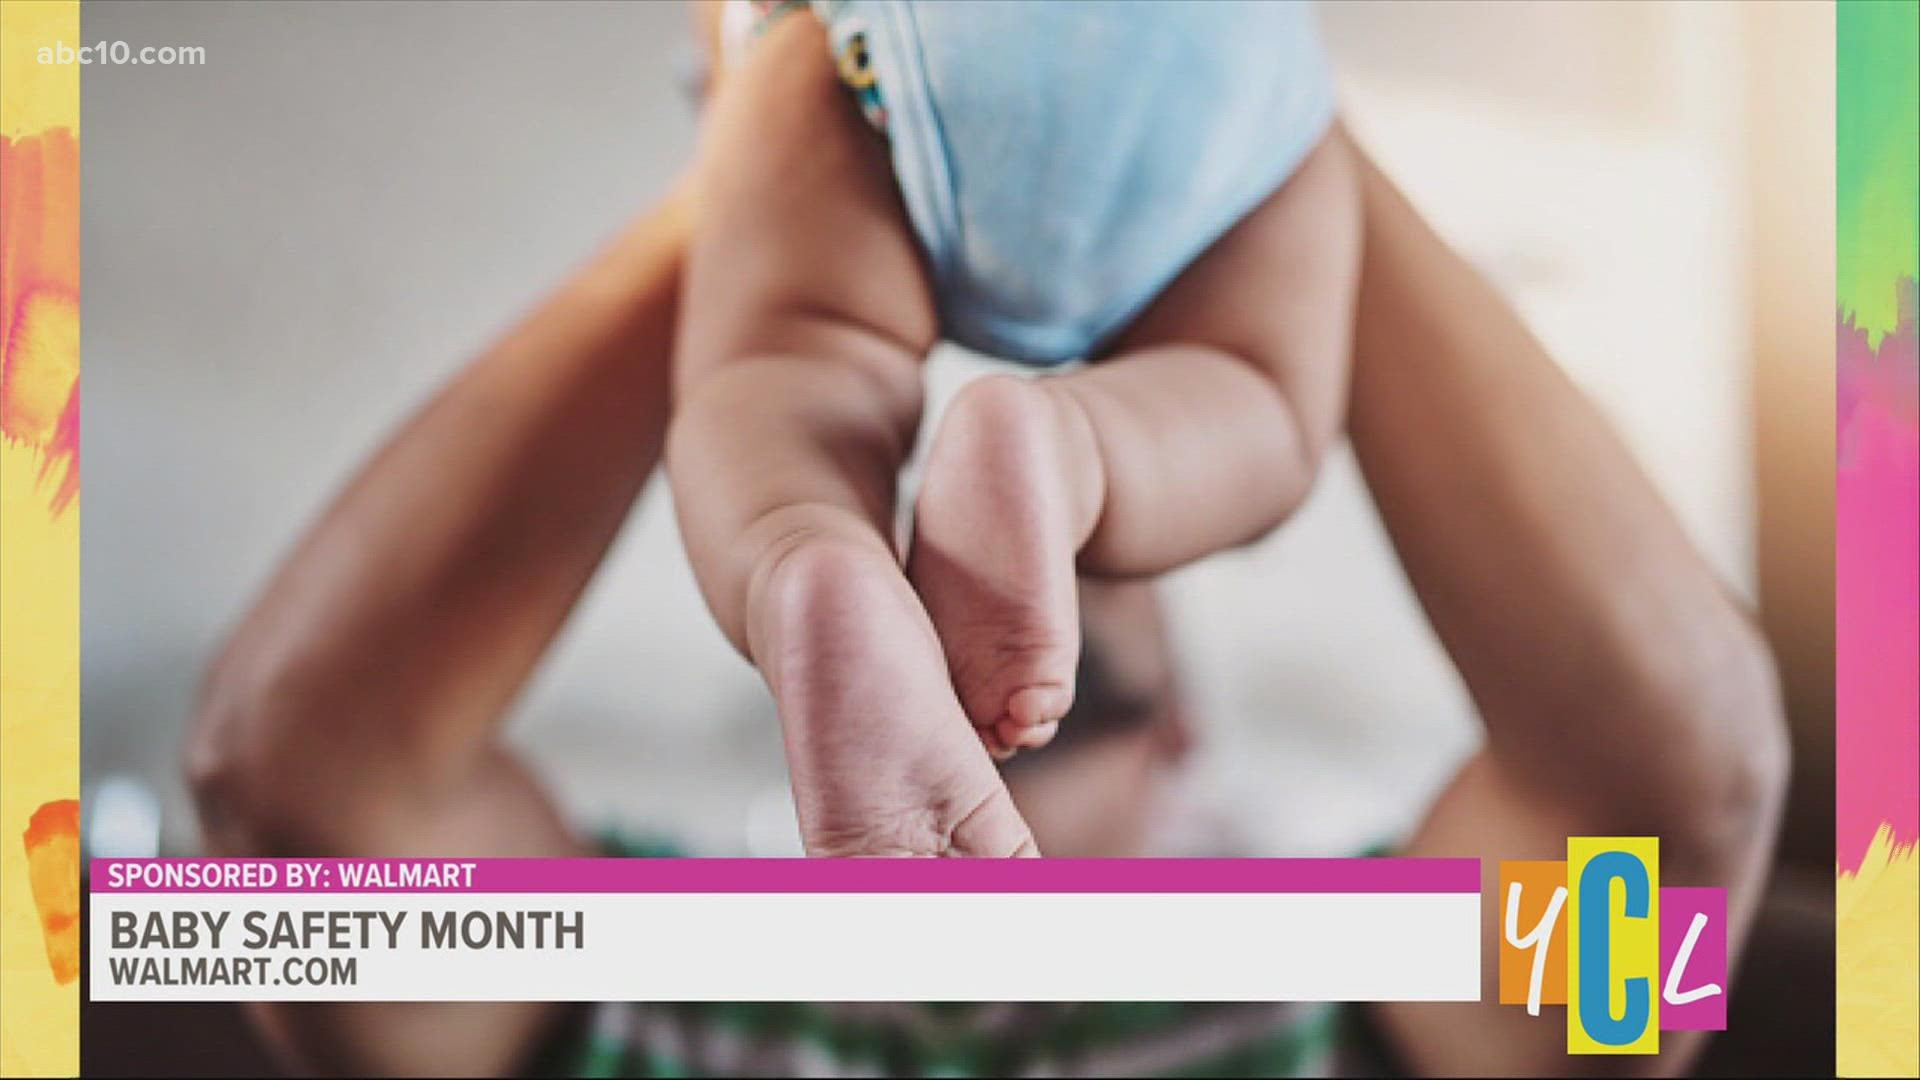 September is baby safety month and Walmart shows us their latest baby essentials and trends.
This segment paid for by Walmart.